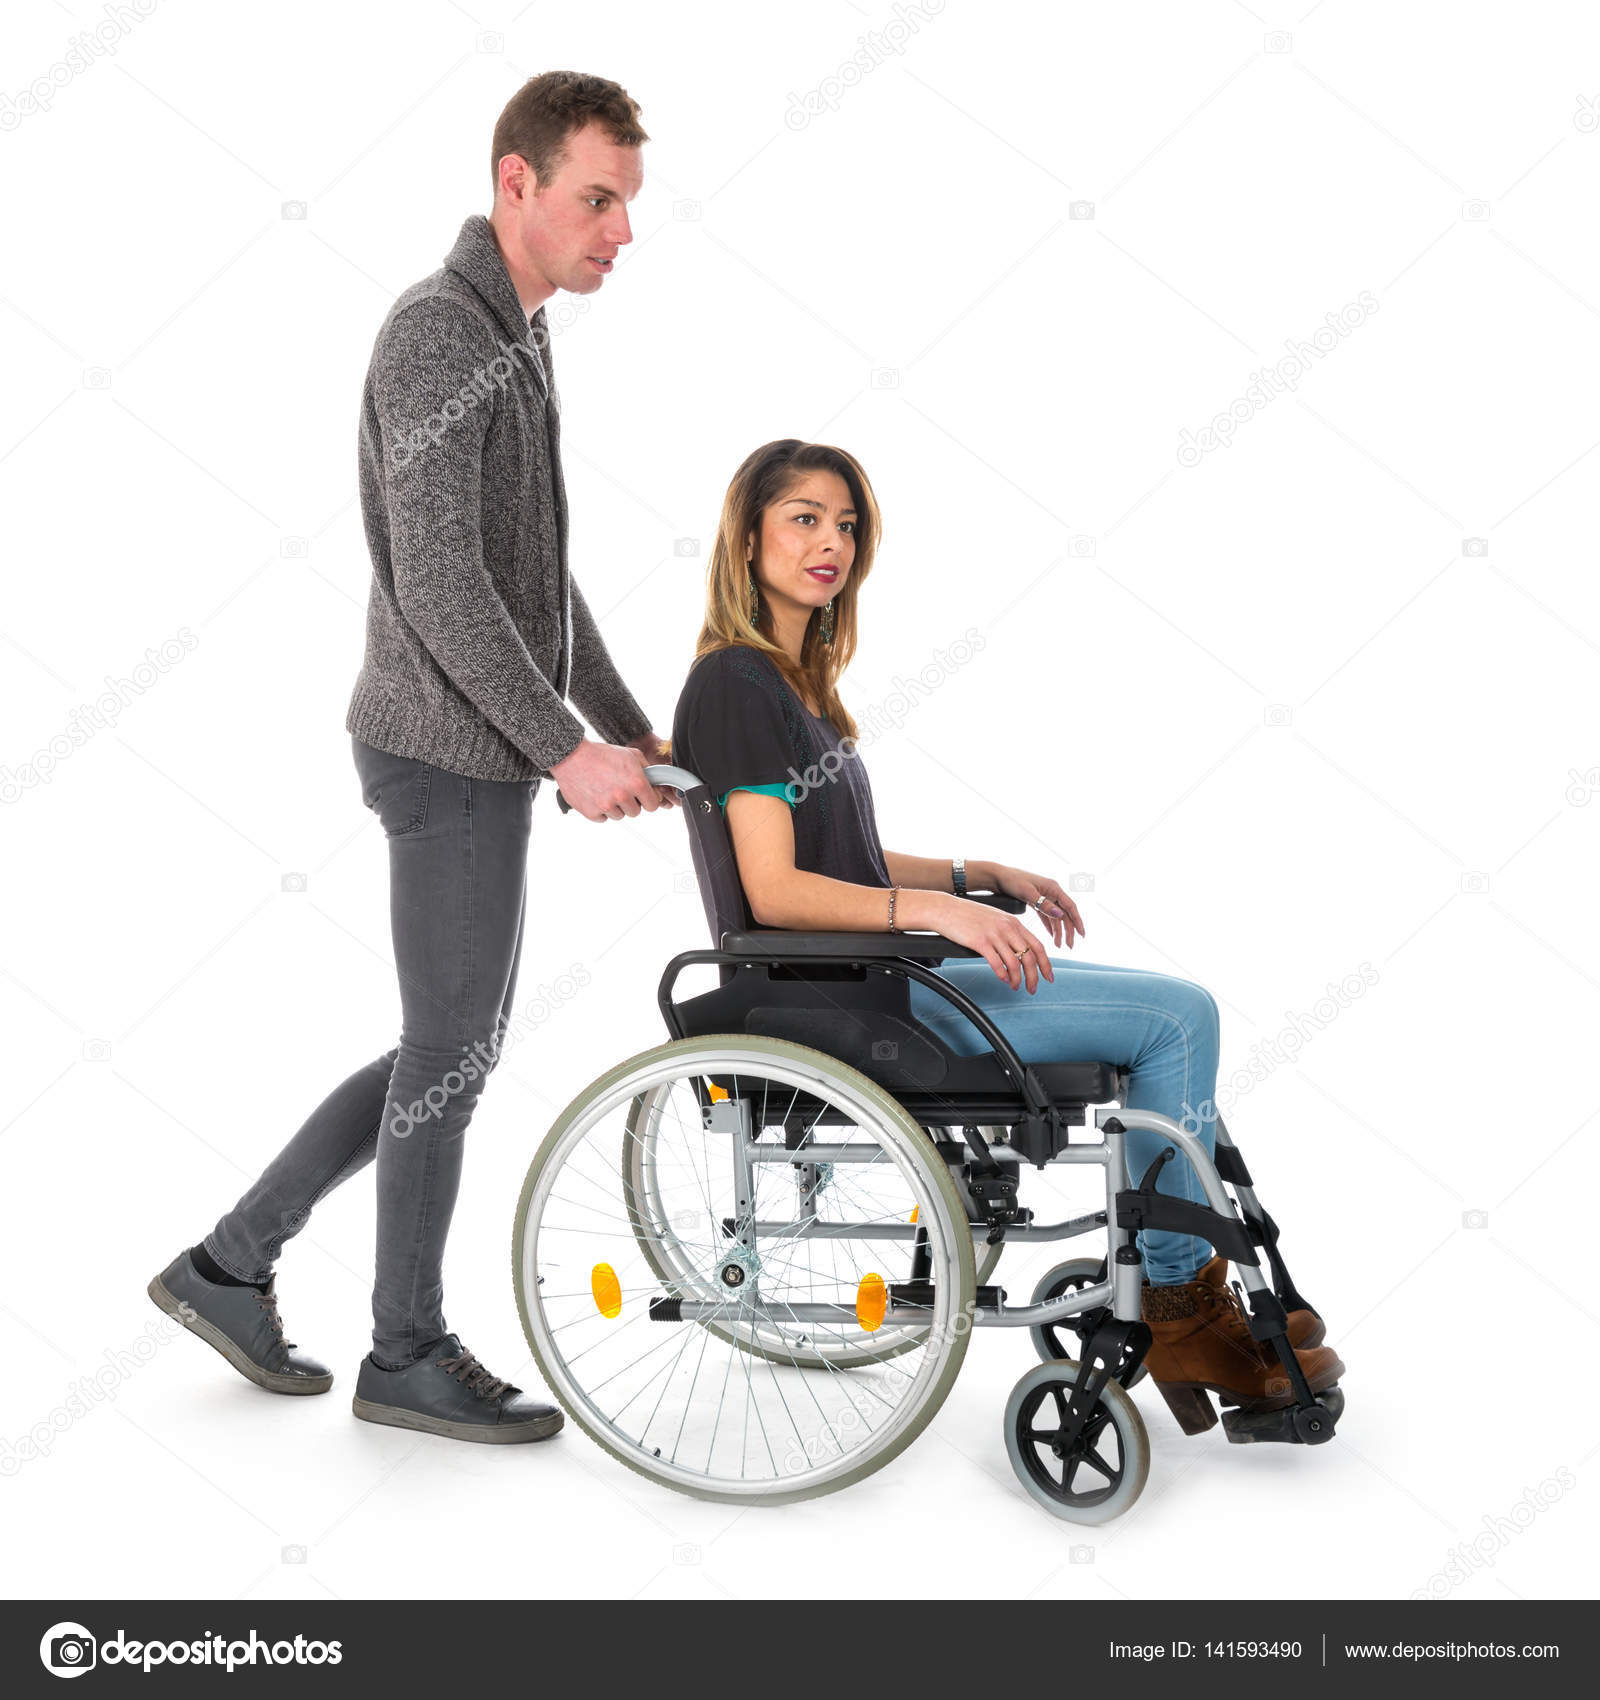 Man pushing woman in a wheelchair — Stock Photo © kruwt #141593490